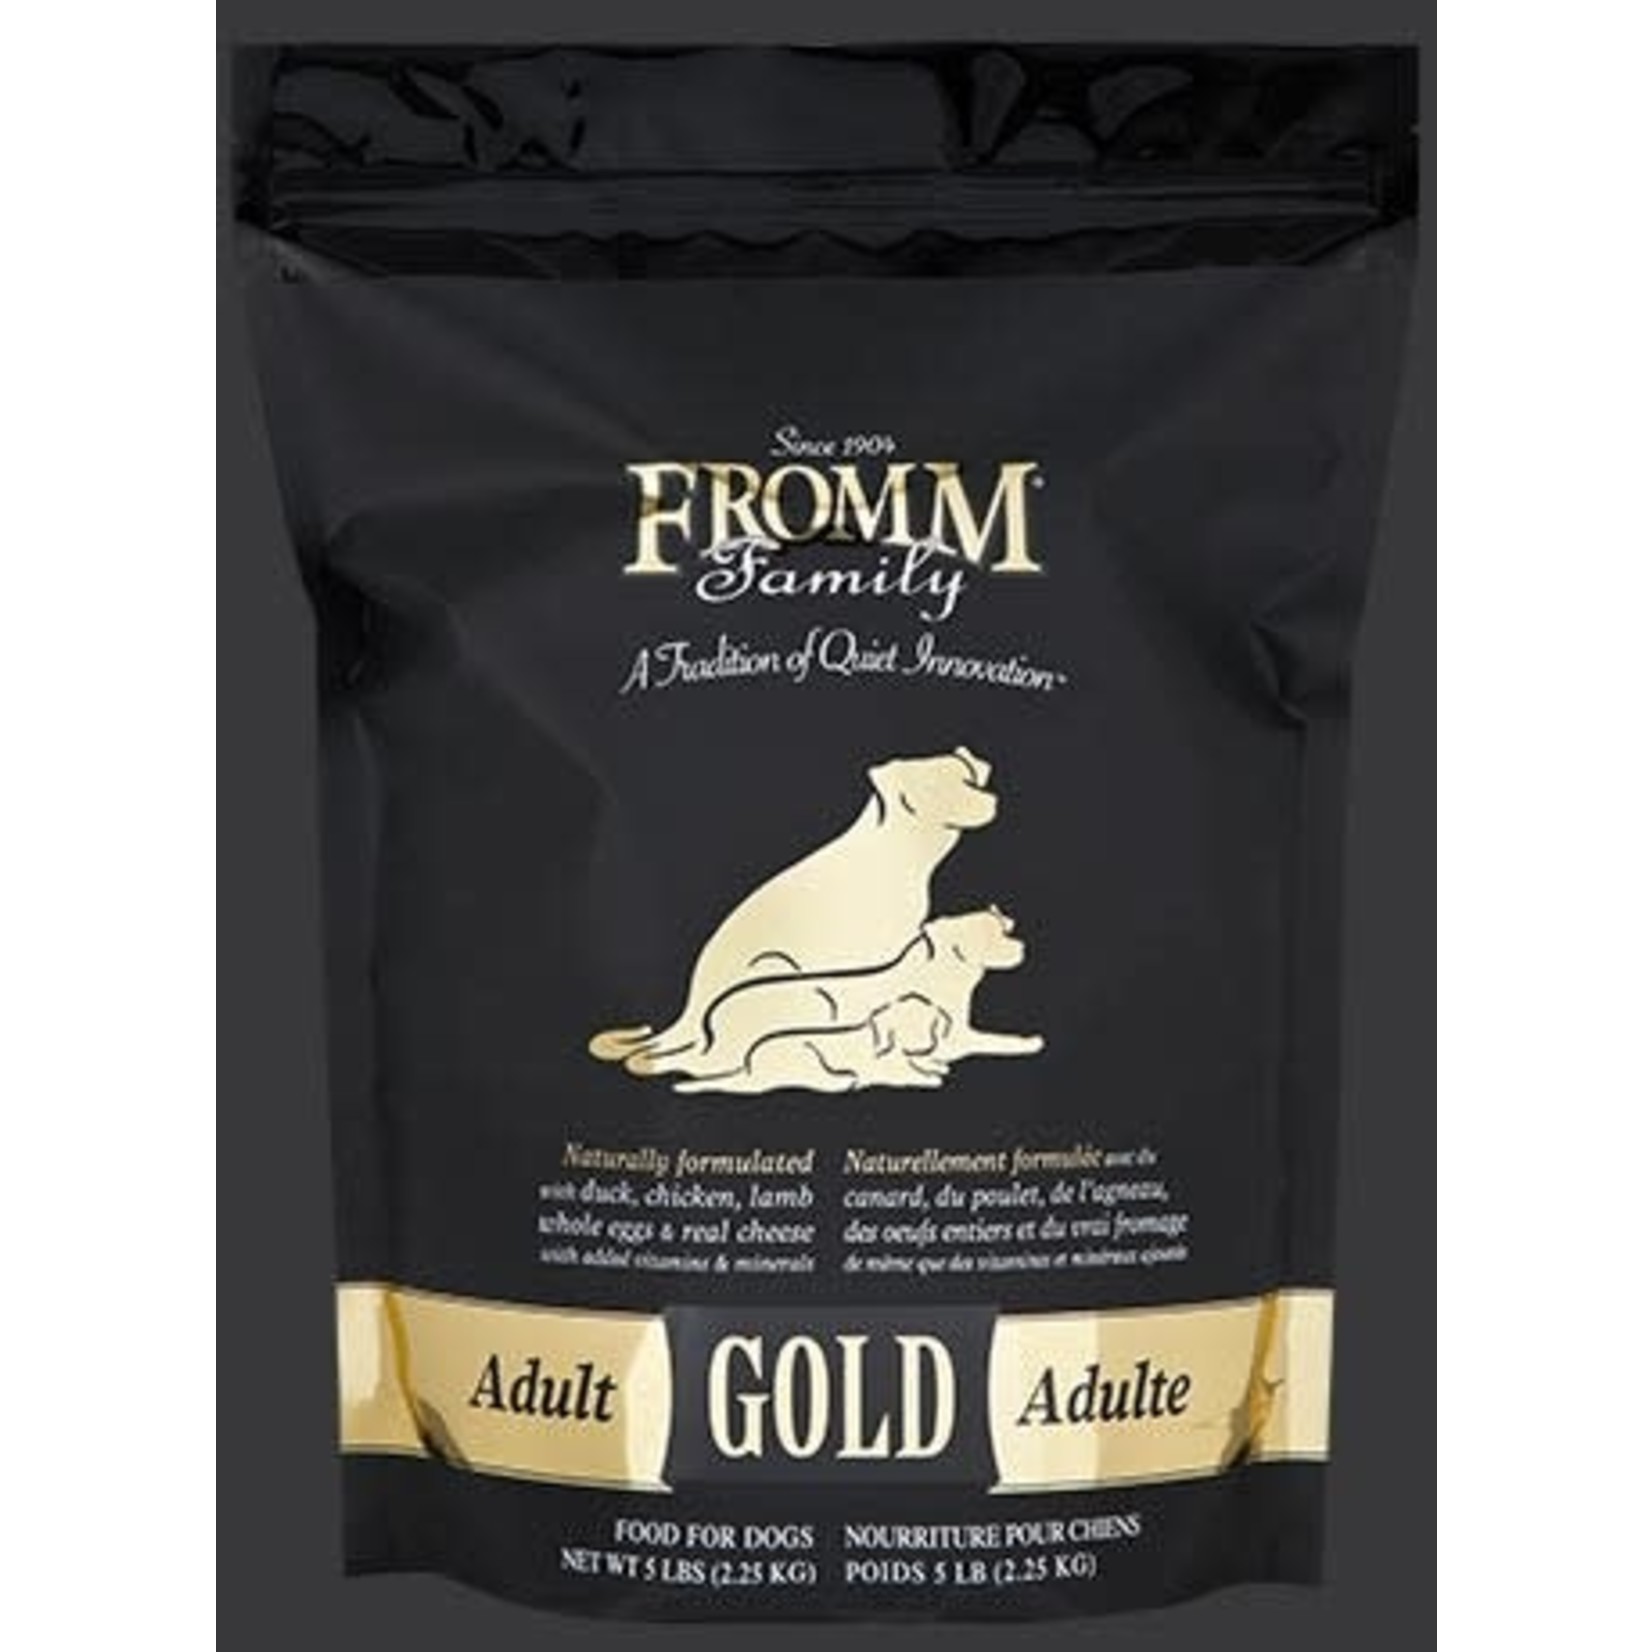 Fromm Family Fromm Adult Gold Dog Food